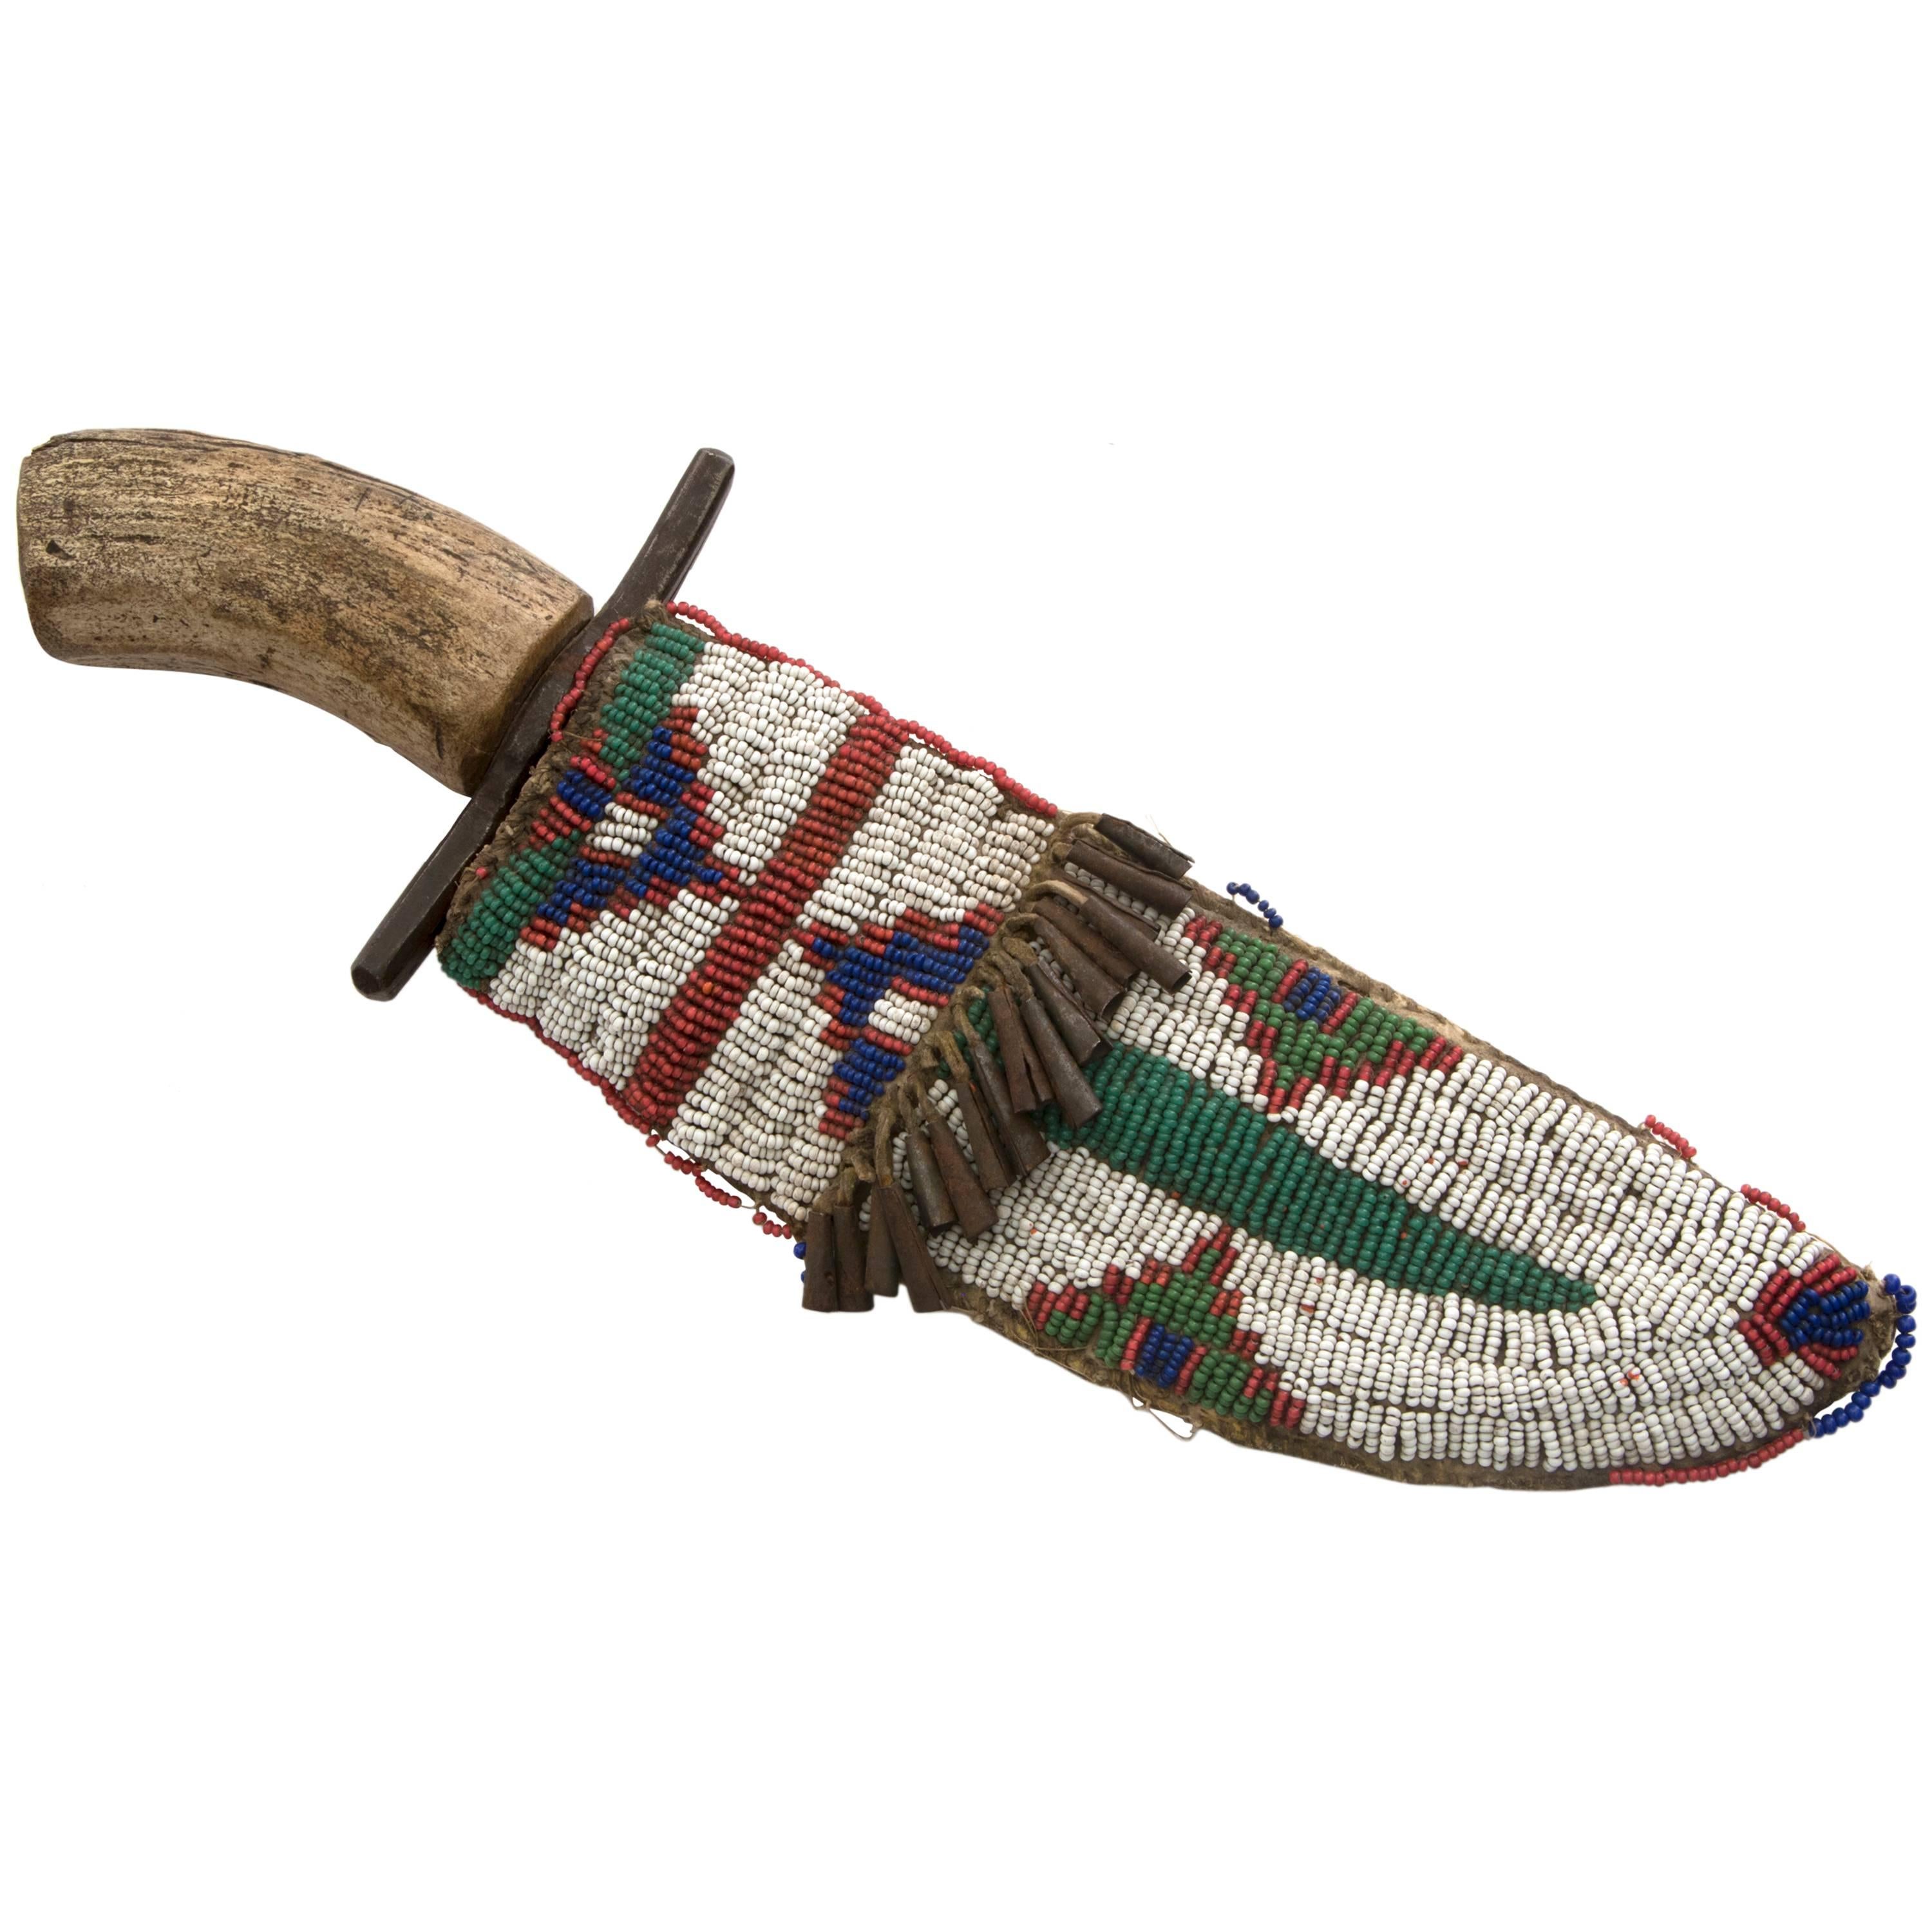 Antique Native American Knife and Sheath, Sioux, 19th Century